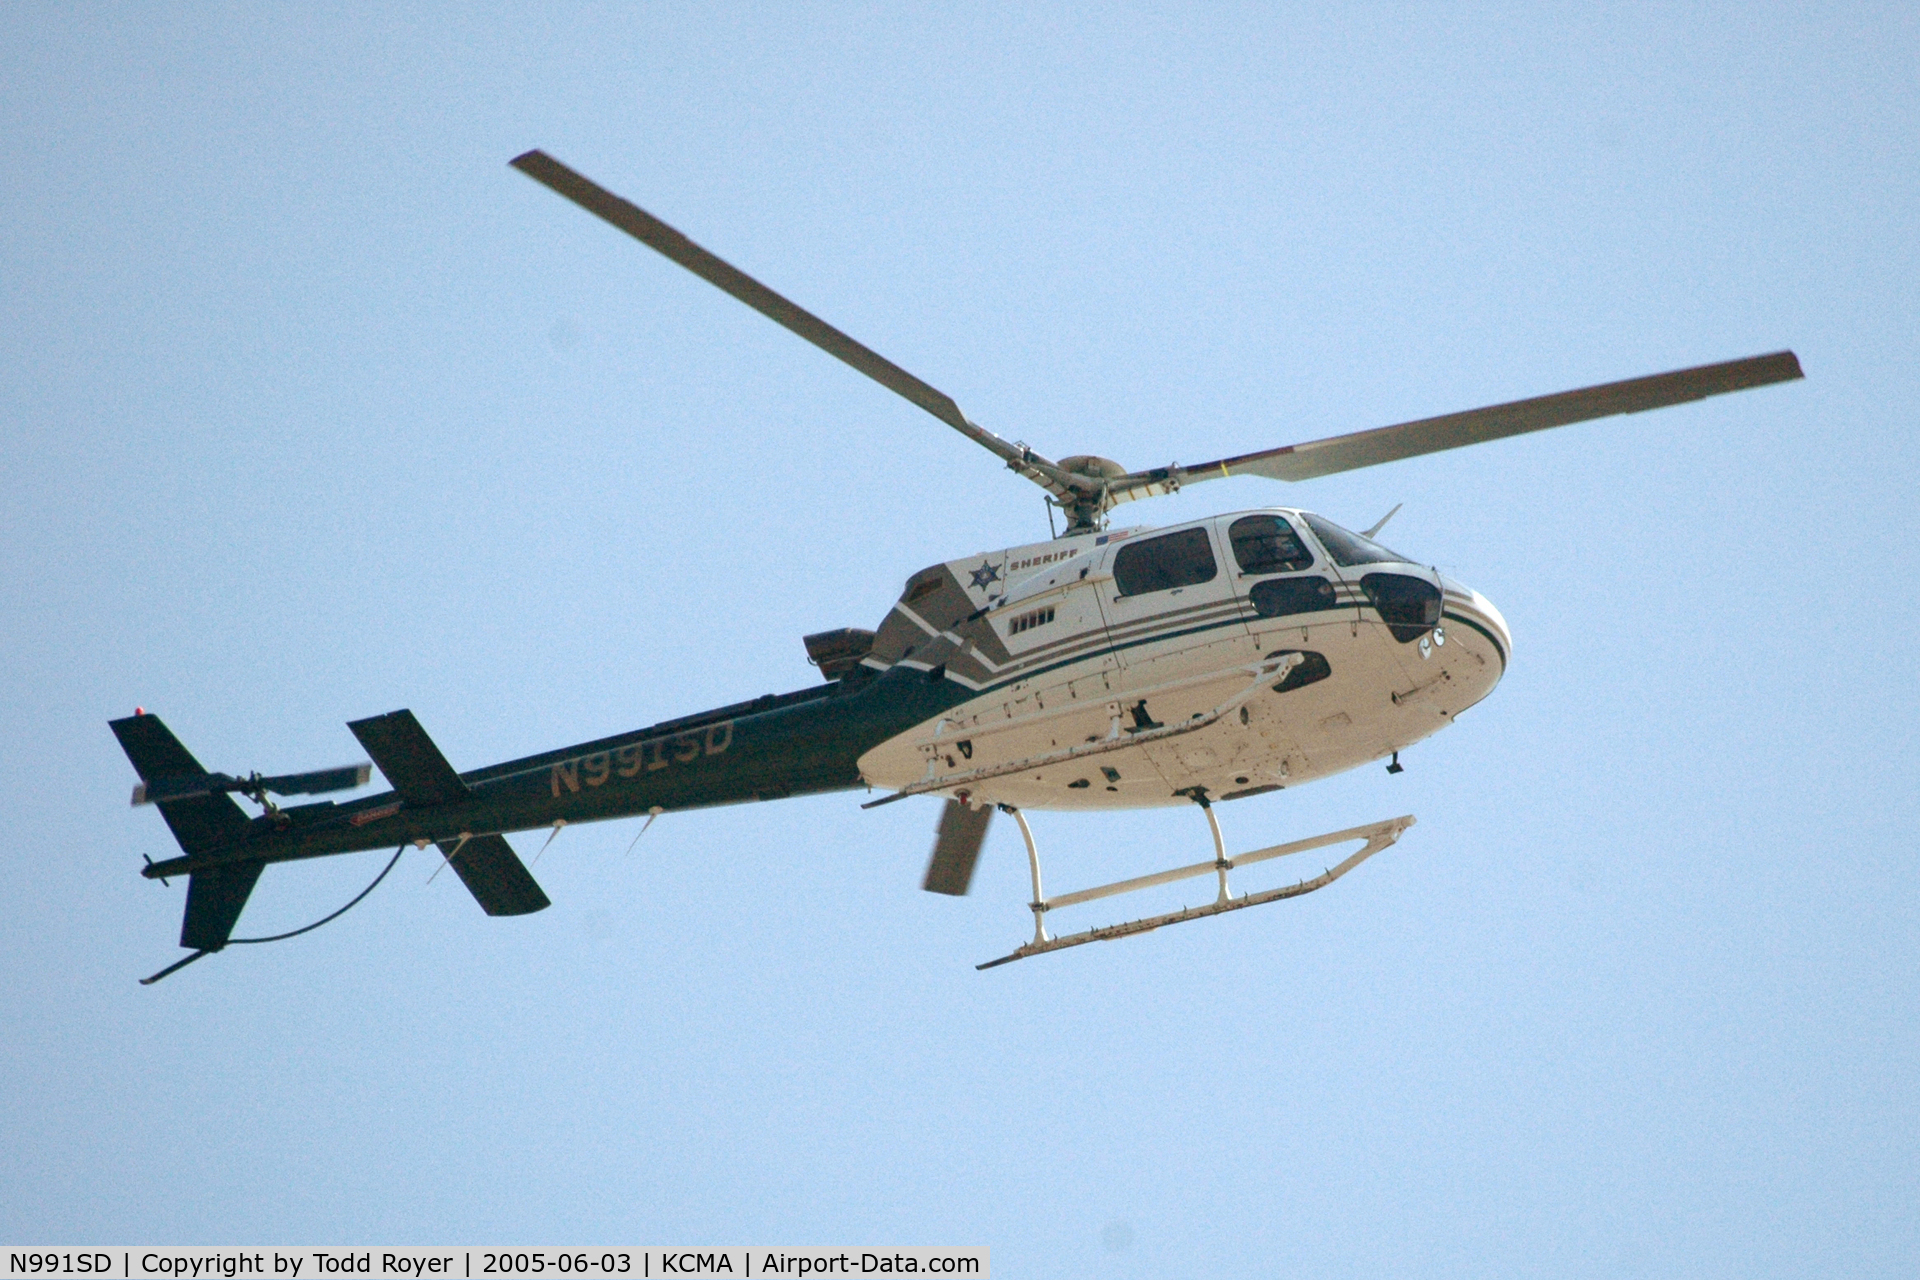 N991SD, Eurocopter AS-350B-3 Ecureuil Ecureuil C/N 3325, From the backyard